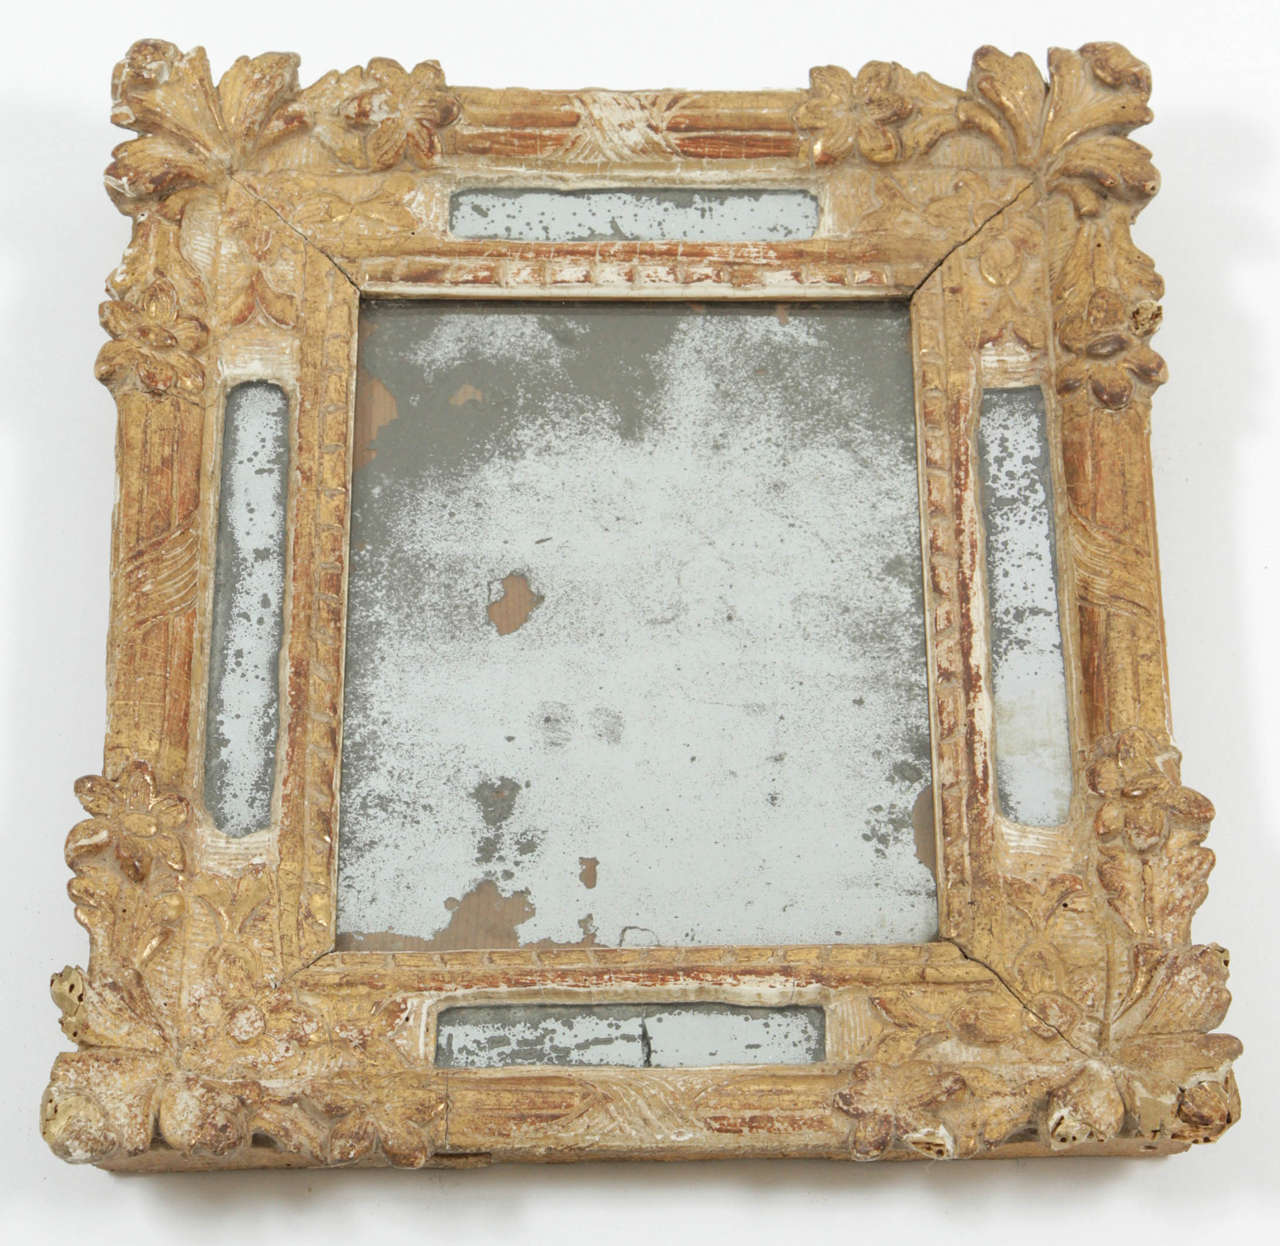 A small Carved and Gilt French Rococo mirror, circa 1750